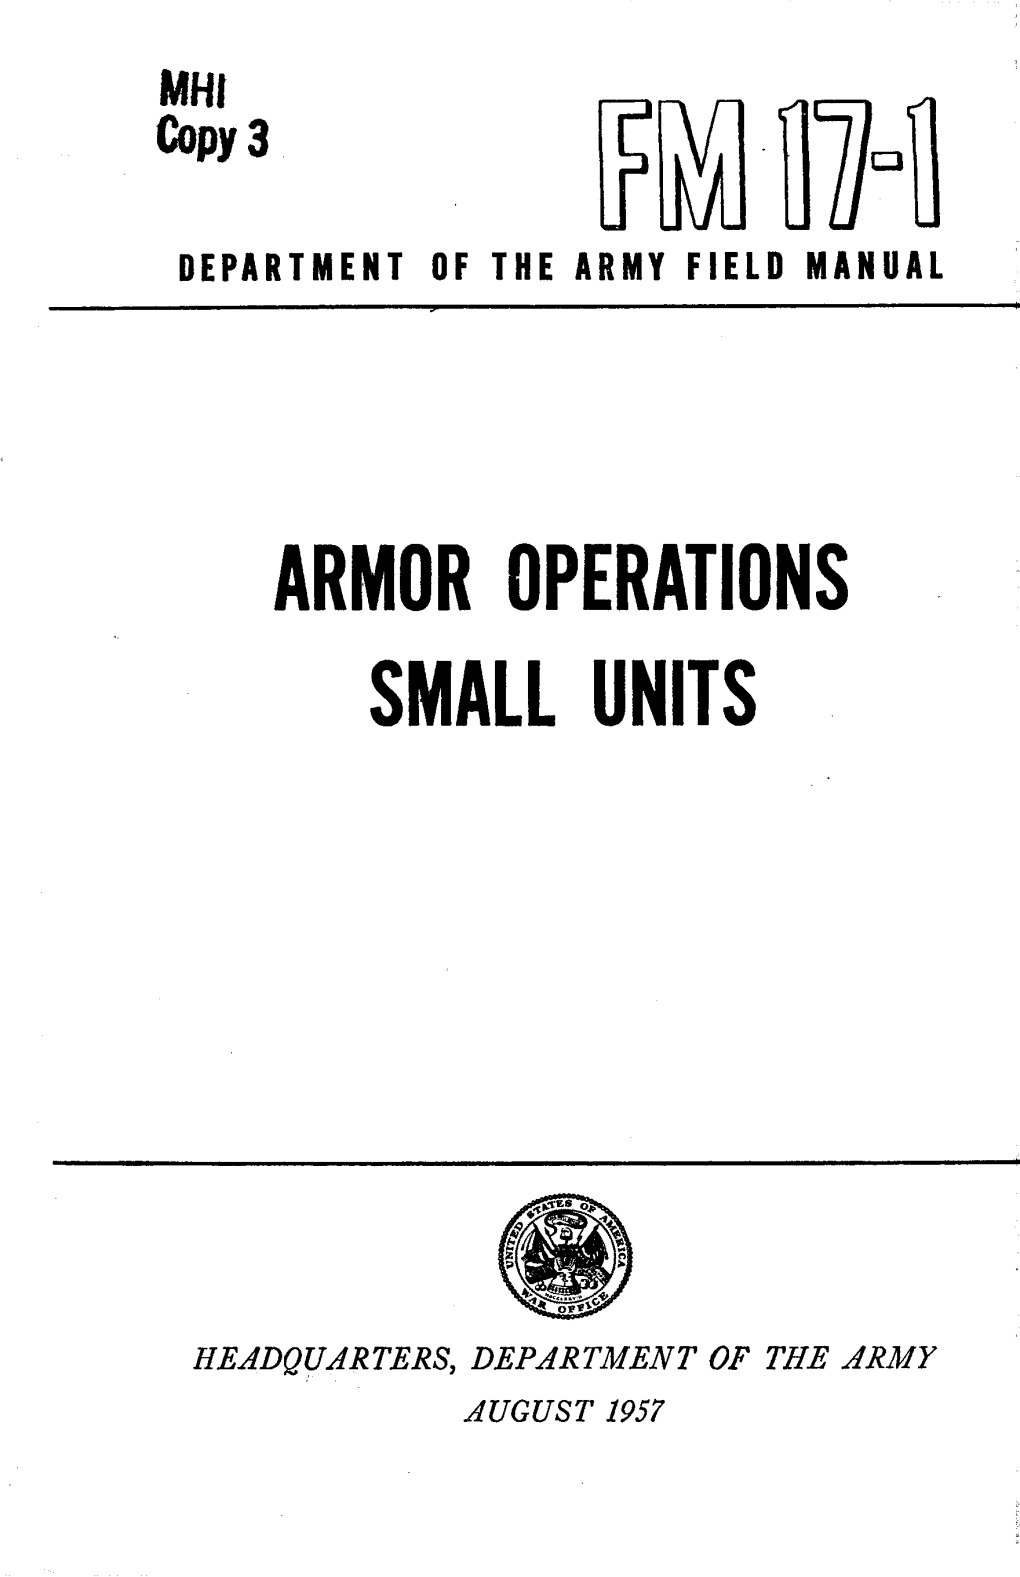 Armor Operations Small Units